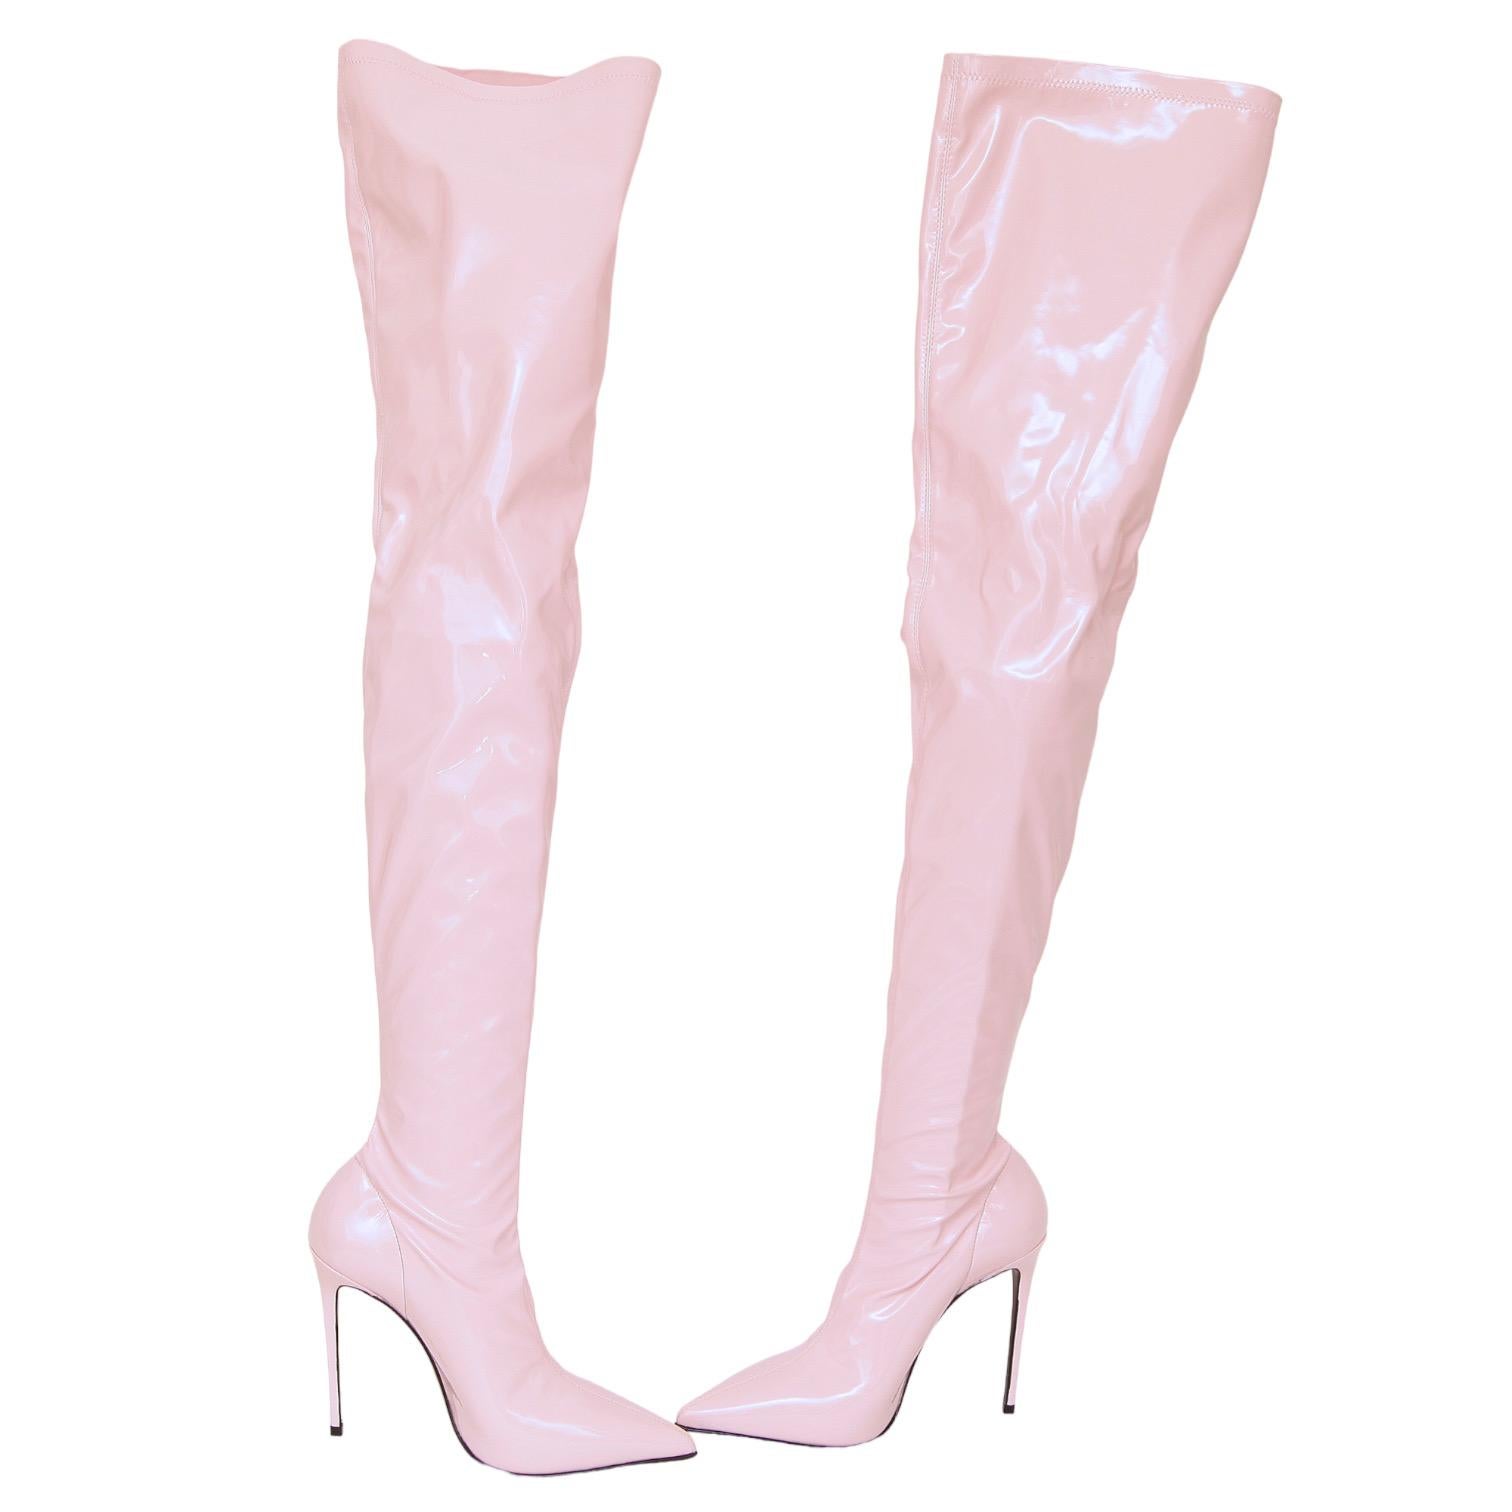 GUARANTEED AUTHENTIC LE SILLA EVA THIGH HIGH PINK STRETCH BOOTS

Retail excluding sales taxes $979.

Details:
- Pink patent leather uppers.
- Thigh high.
- Pointed toe.
- Pull on.
- Stiletto heel.
- Leather insole and sole.
- Comes with dust